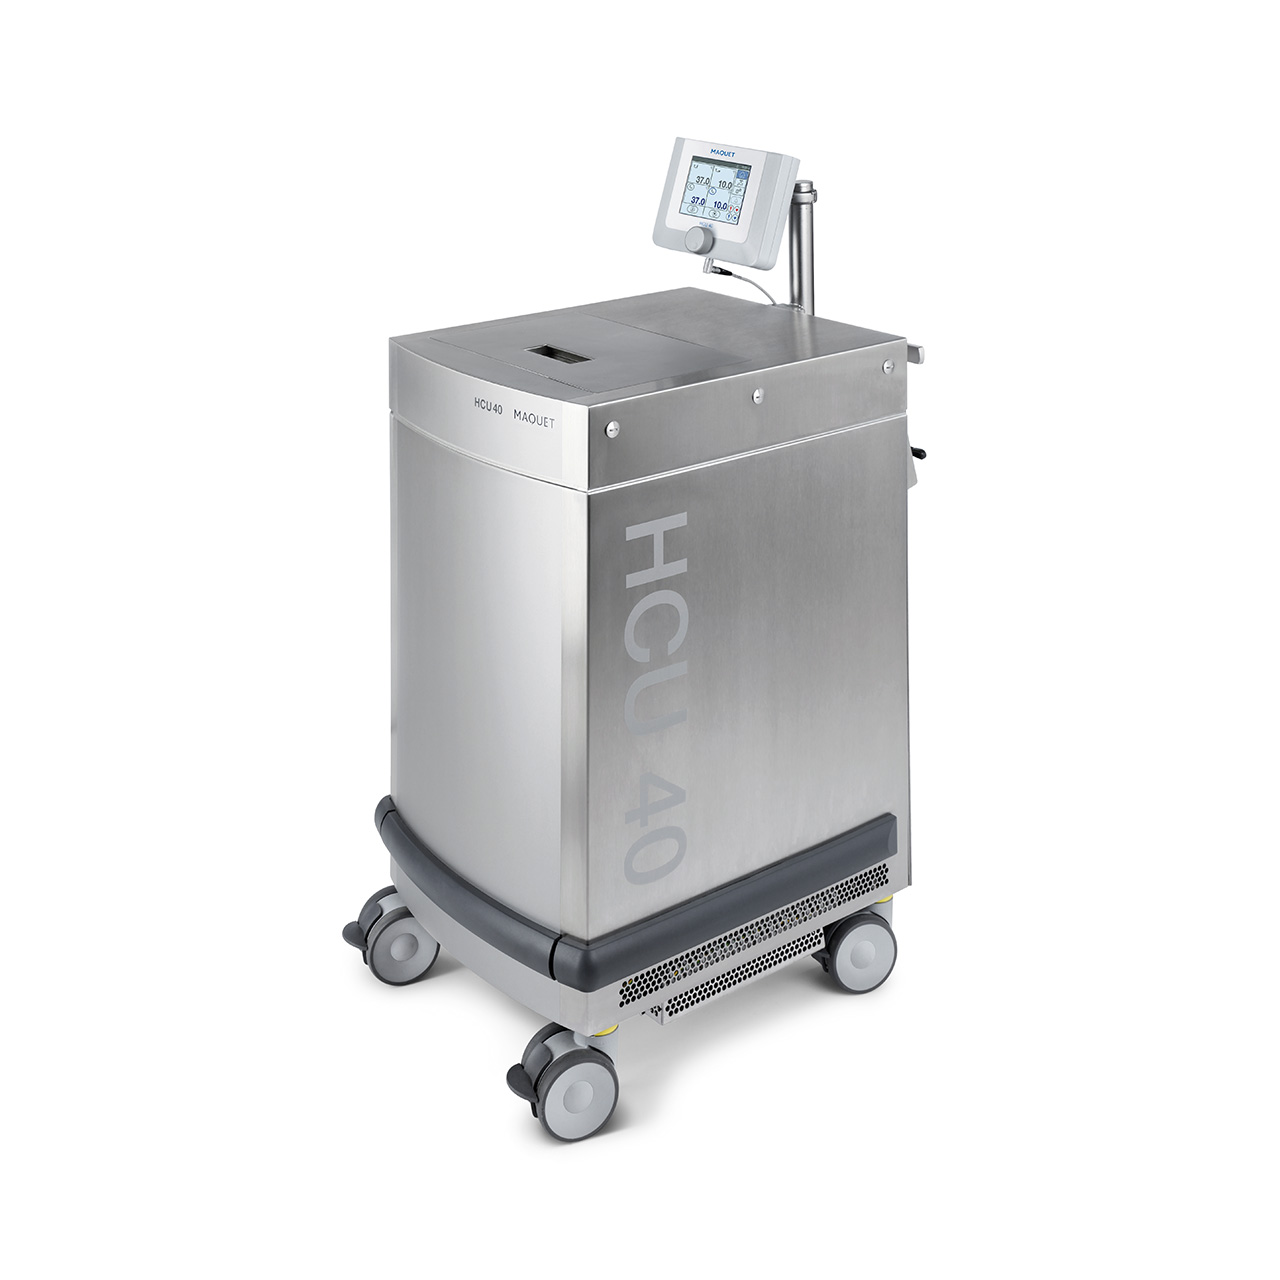 Hypo-/hyperthermia unit for use during extracorporeal circulation with HCU 40 Heater-Cooler Unit